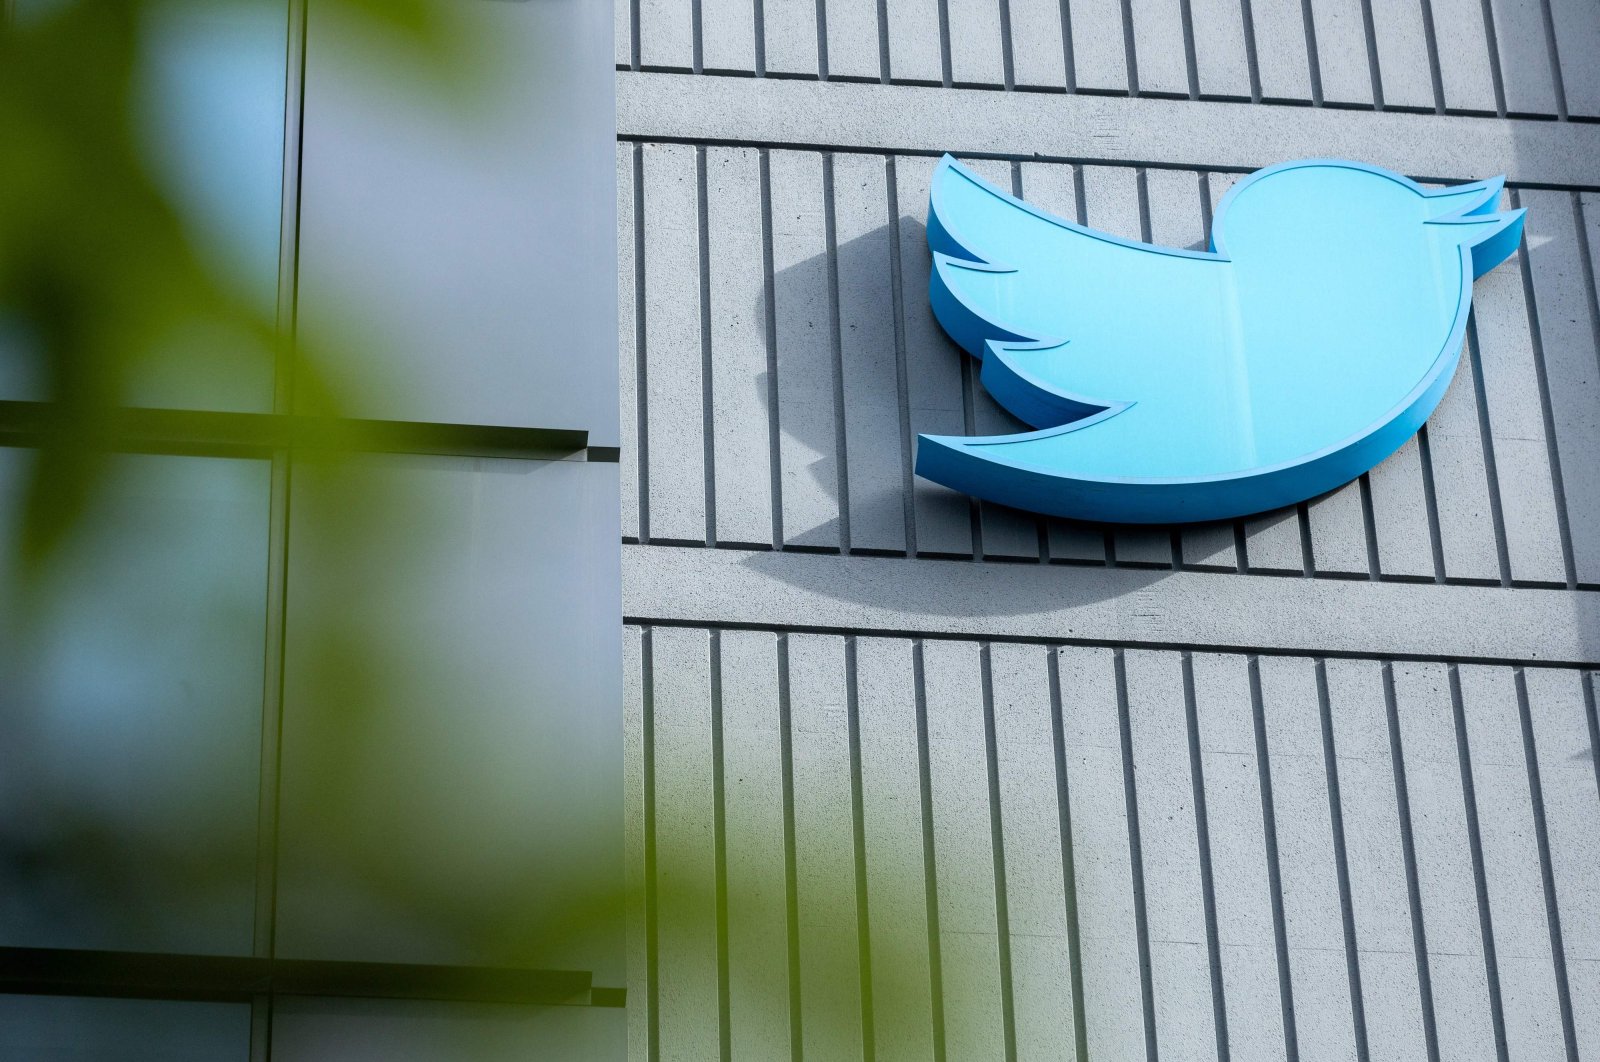 The Twitter logo is seen on a sign on the exterior of Twitter headquarters in San Francisco, California, U.S., Oct. 28, 2022. (AFP Photo)